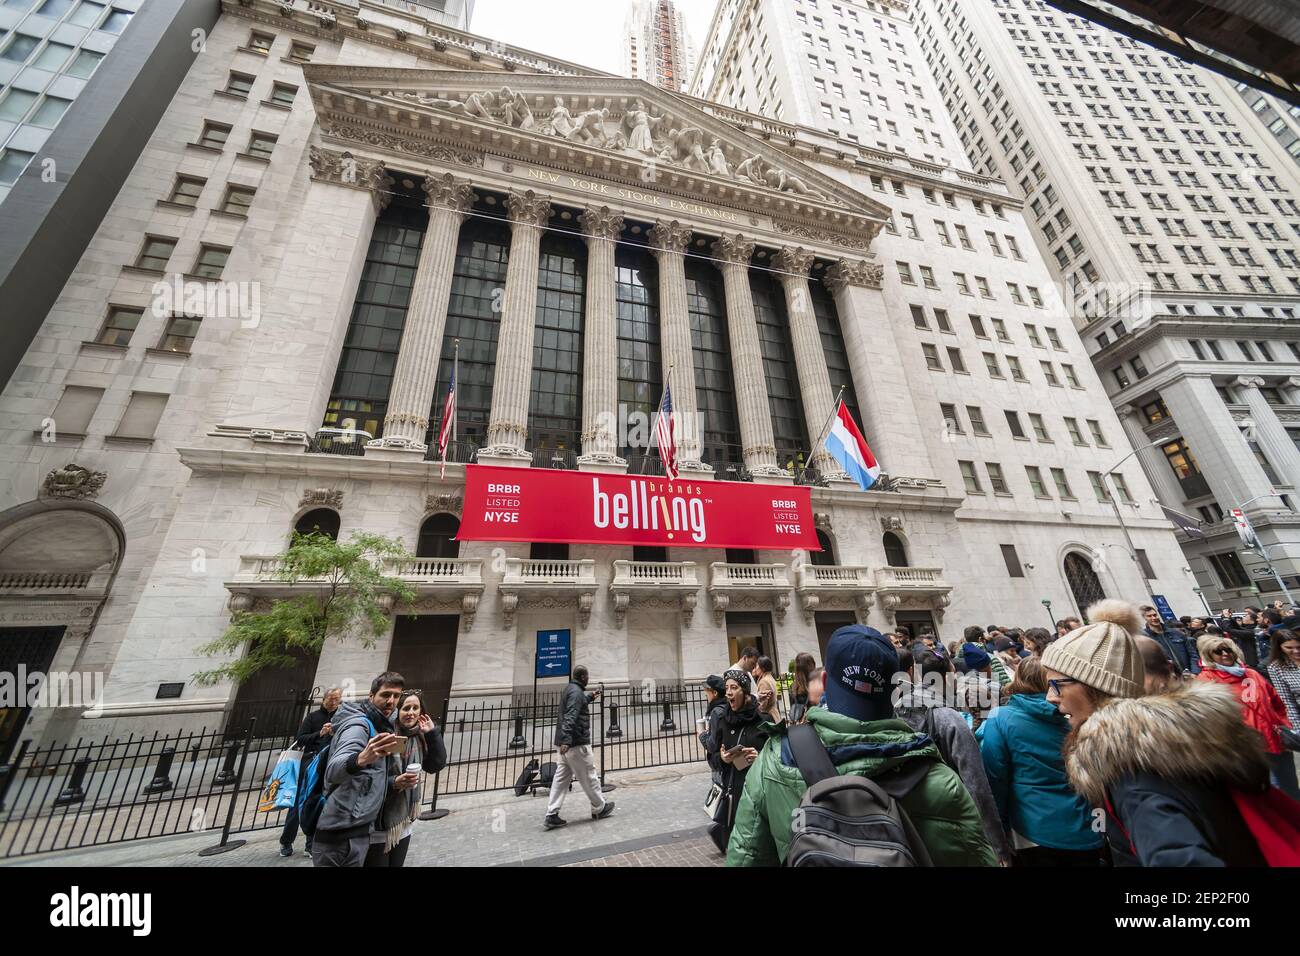 The New York Stock Exchange in Lower Manhattan in New York on Thursday,  October 17, 2019 is decorated with a banner for the BellRing Brands initial  public offering. BellRing Brands is a